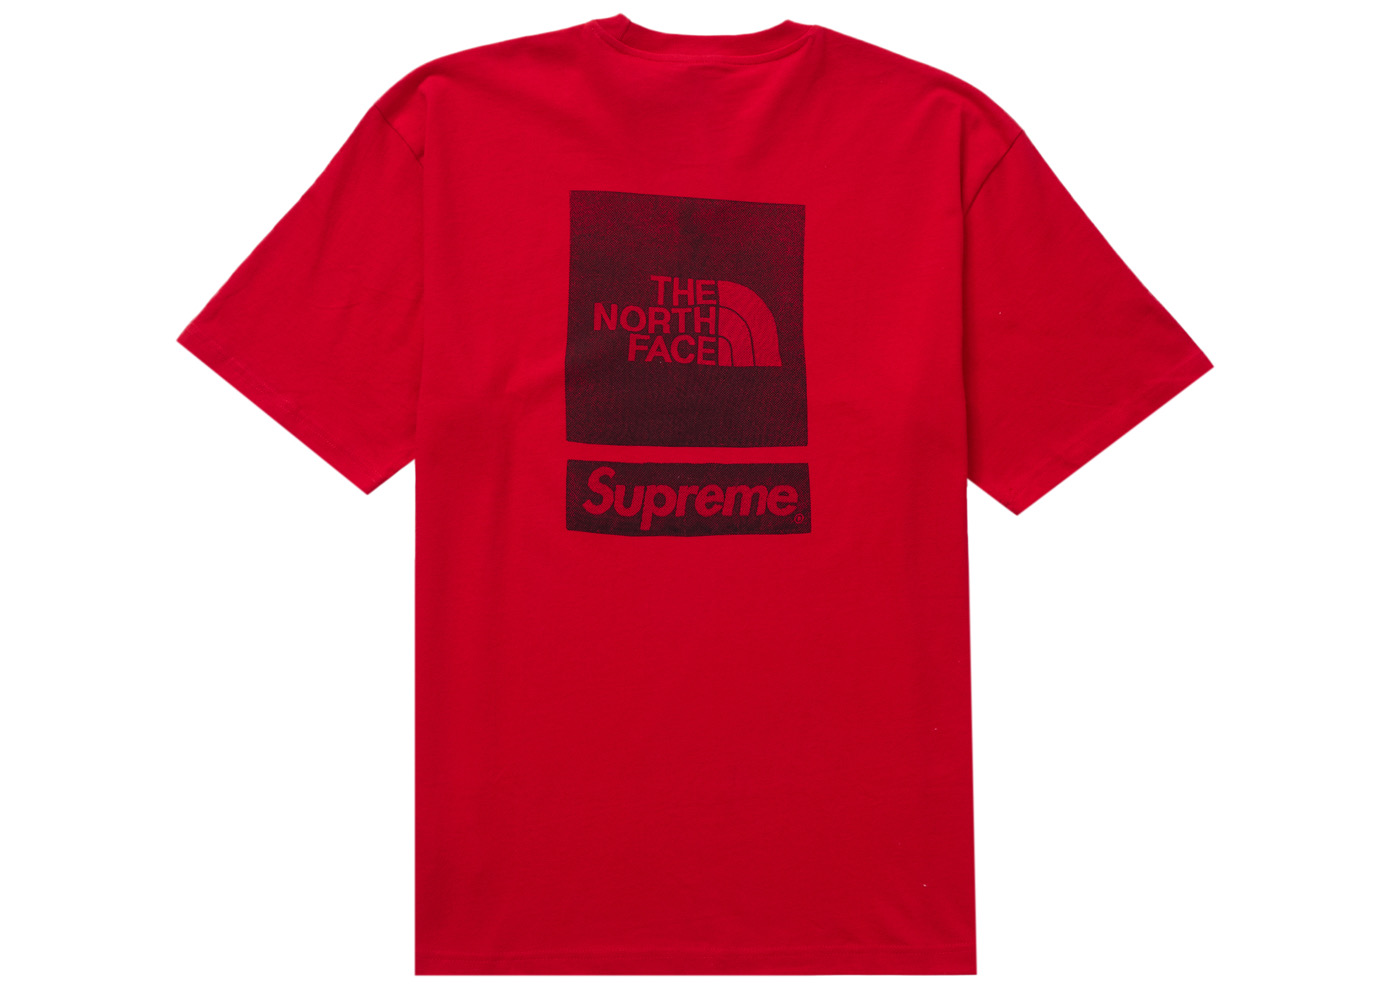 Supreme The North Face S/S Top Tan Men's - SS24 - US